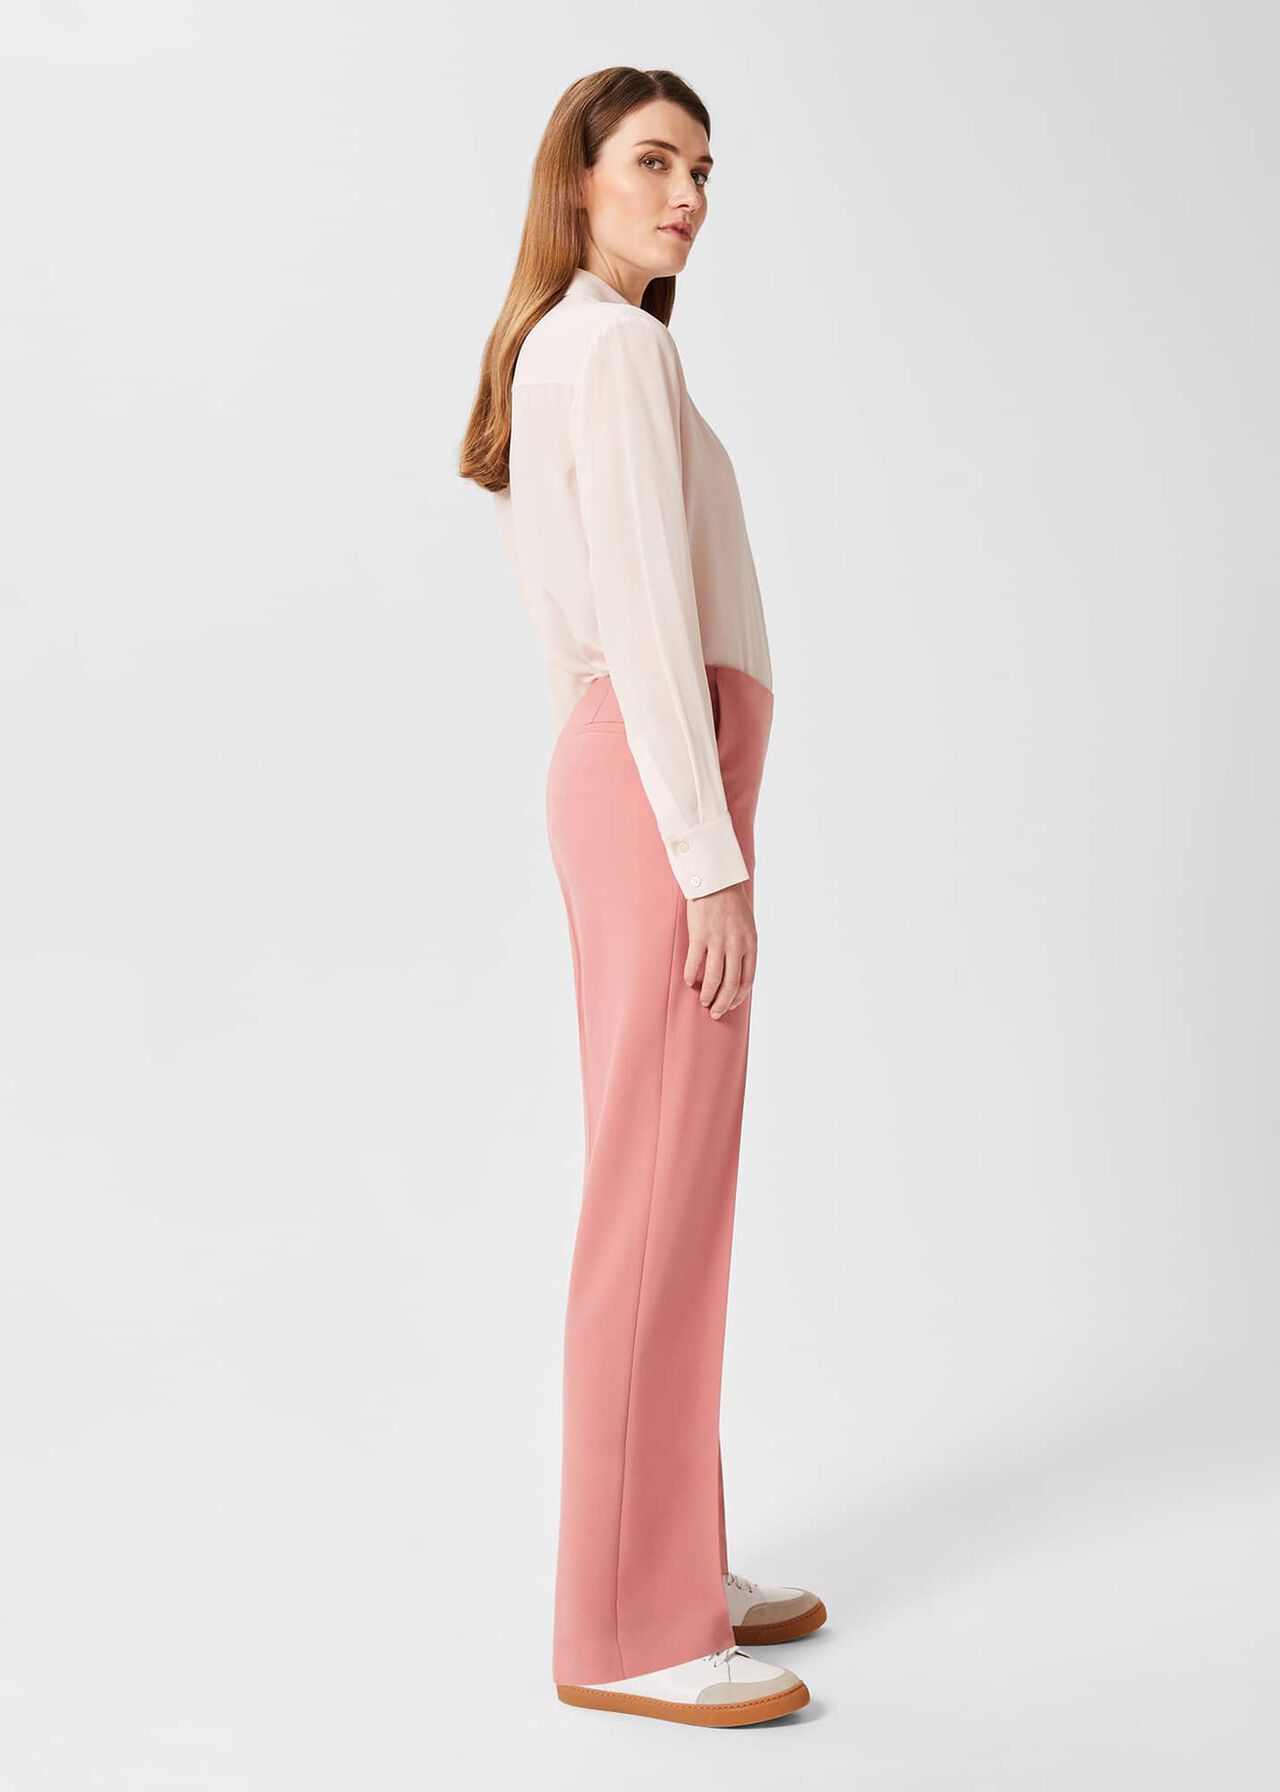 Rozi Trousers, Pink, hi-res